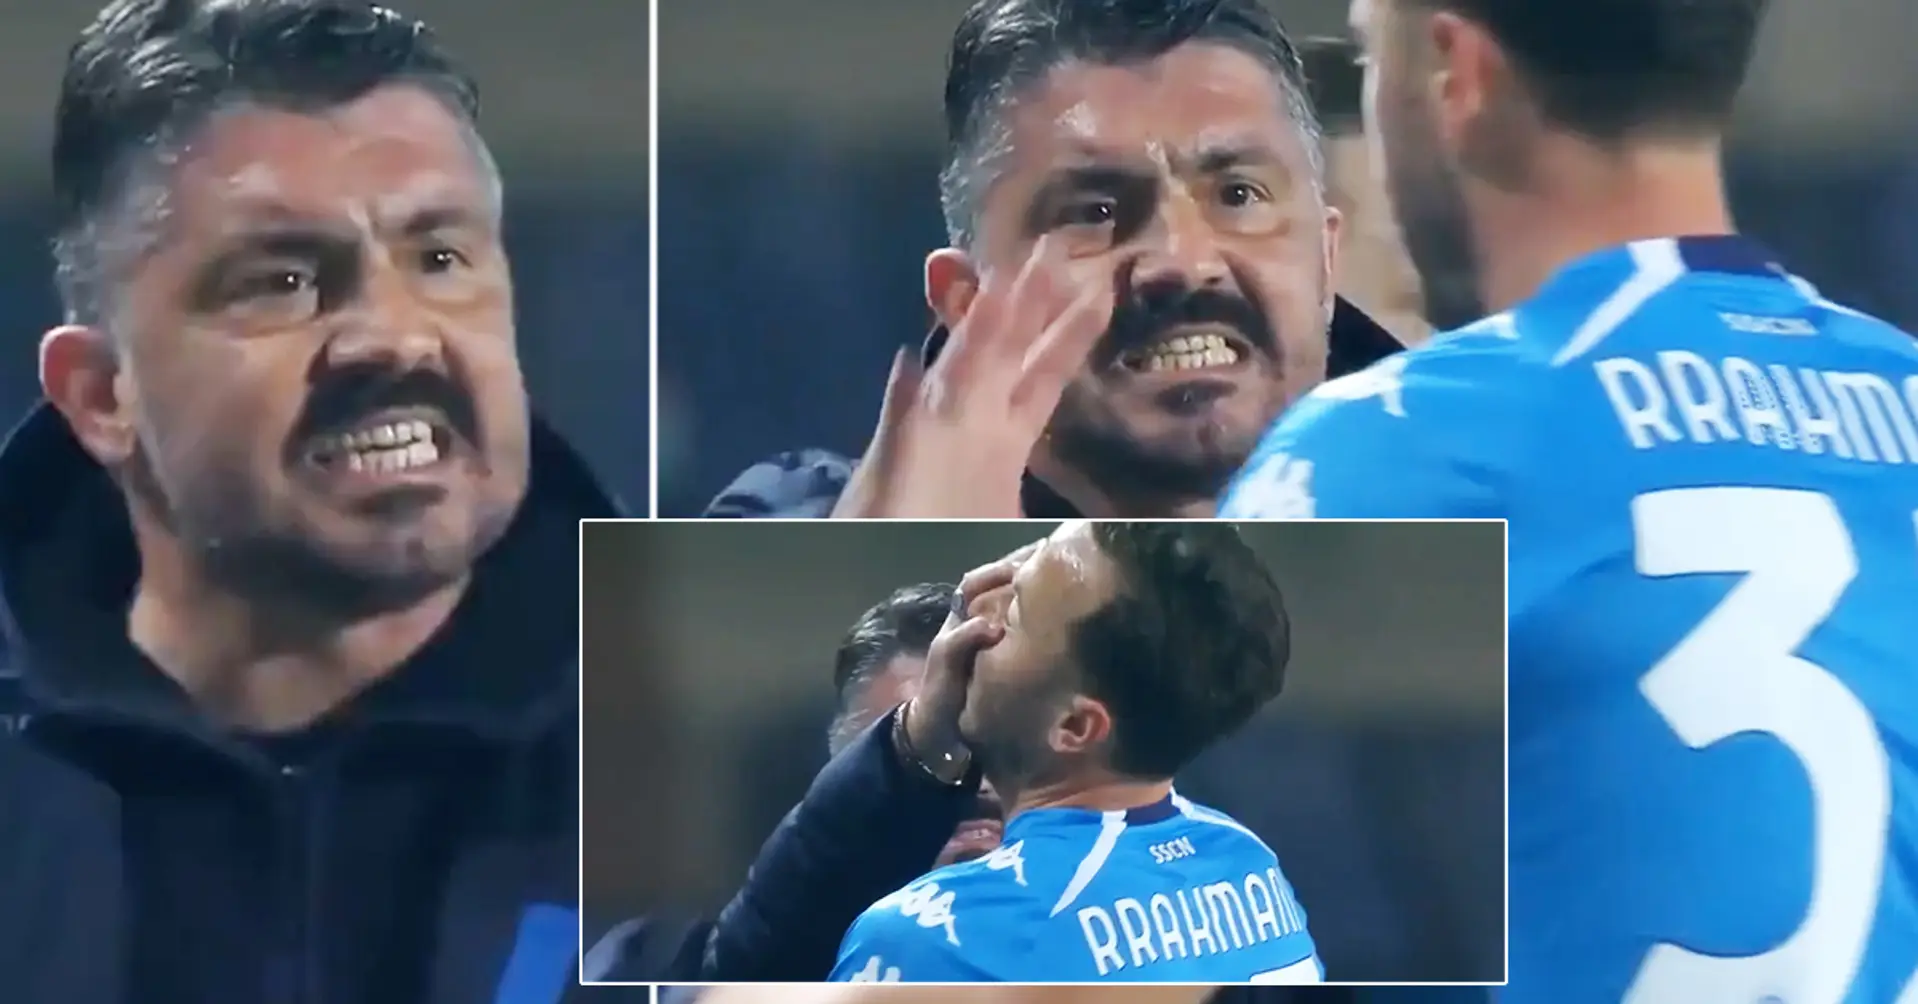 This is how Gennaro Gattuso shows love to his players